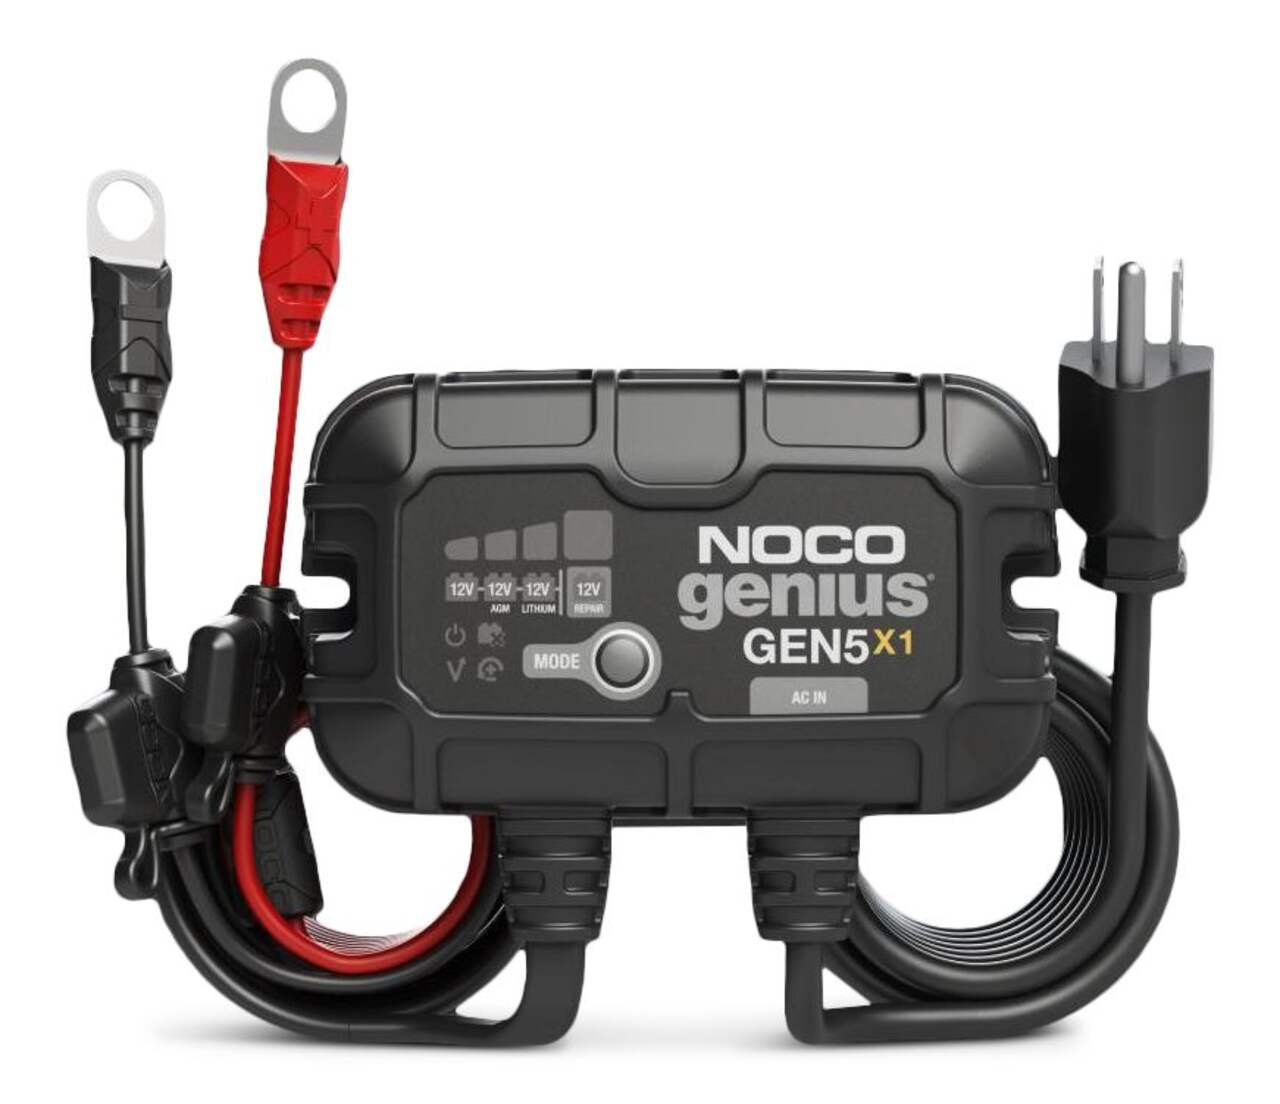 NOCO Genius 2D Direct Mount Battery Charger and Maintainer 12V 2 Amp